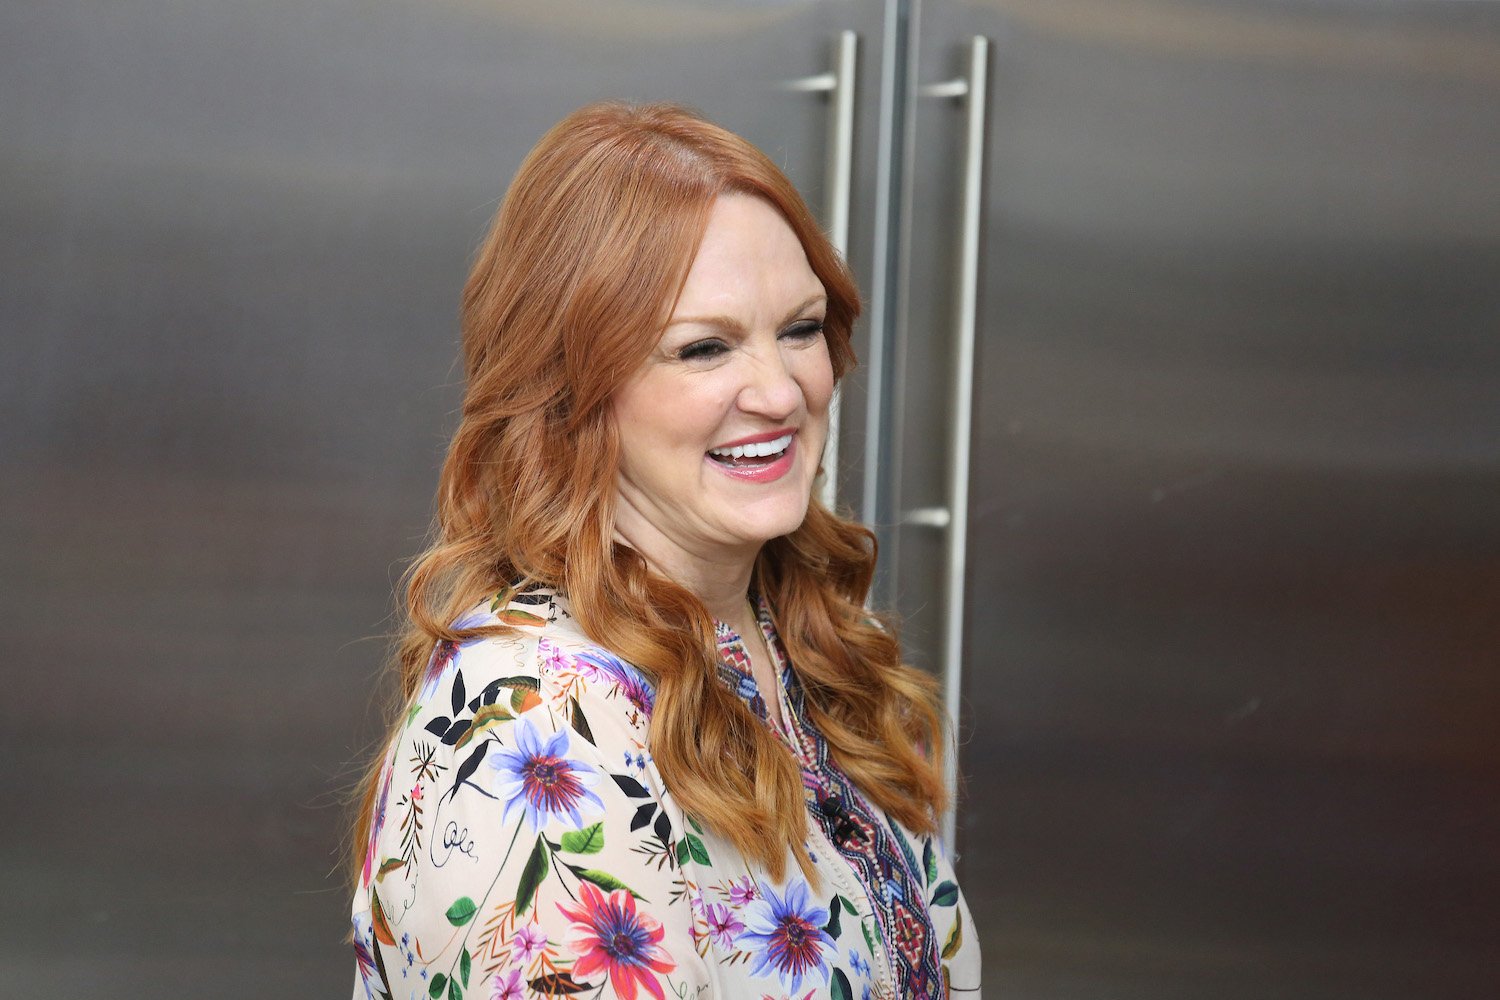 'The Pioneer Woman' Ree Drummond turns and smiles while wearing a bright shirt on the set of the 'Today' show in 2019